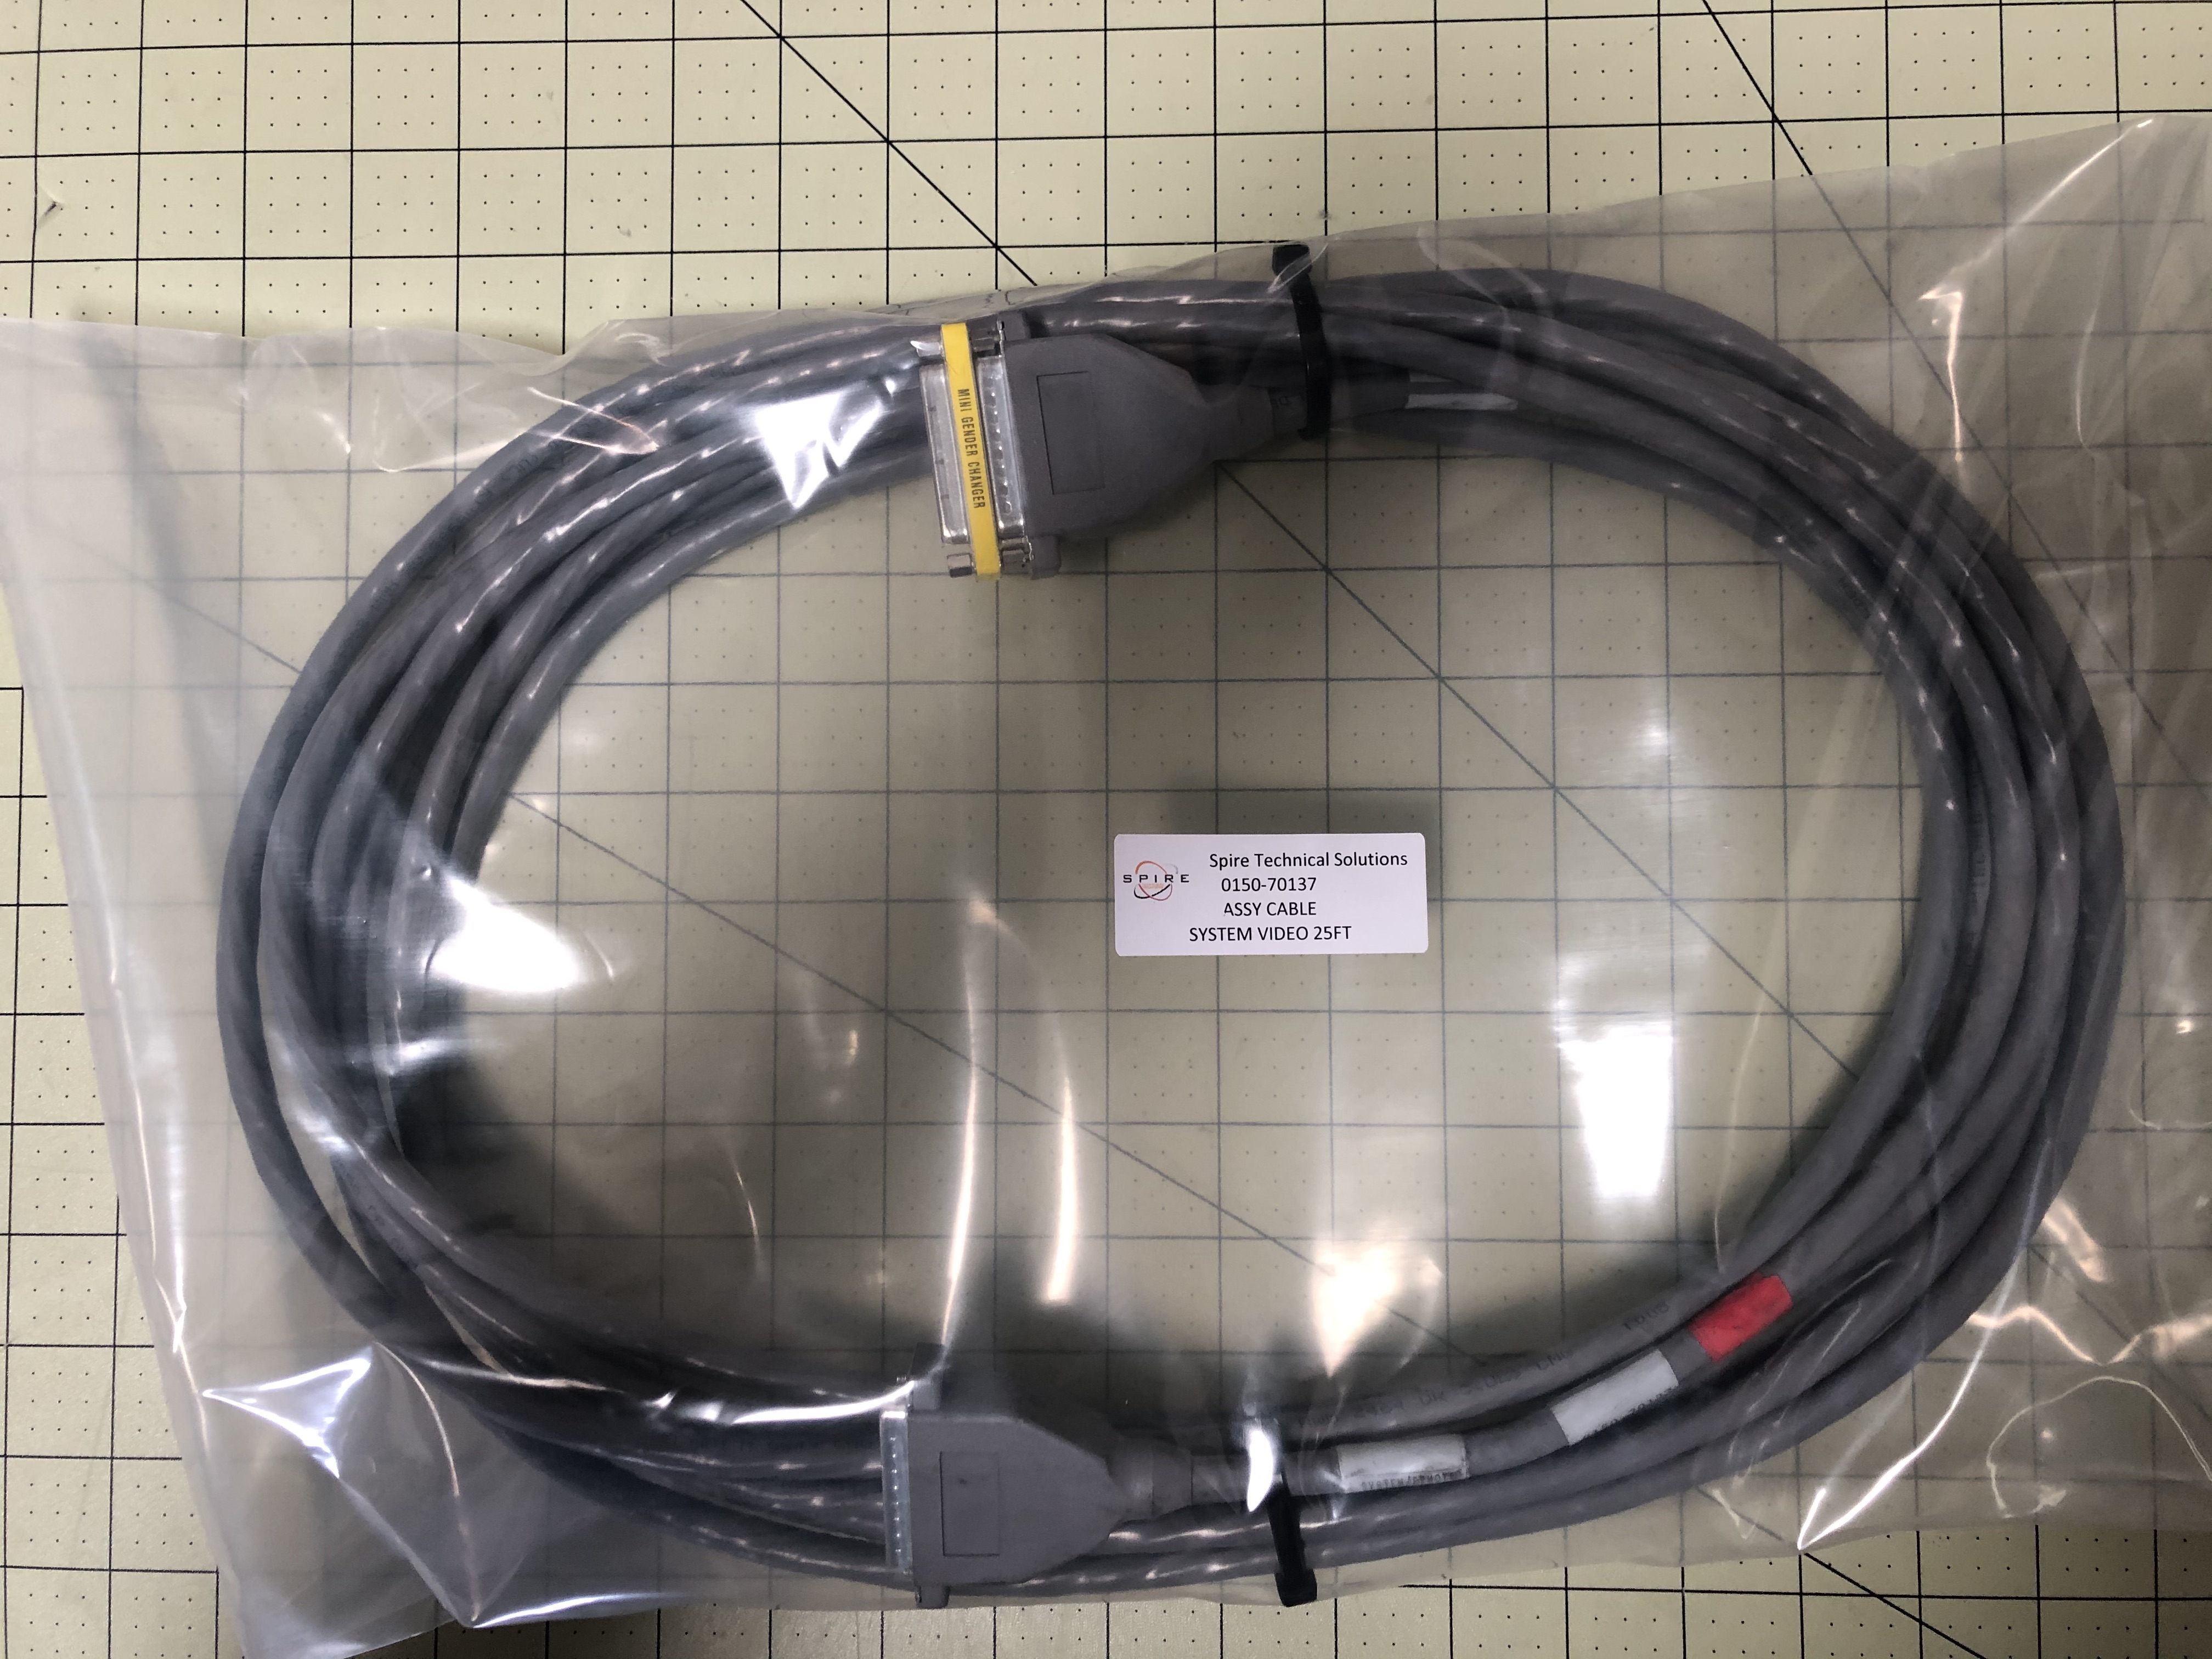 ASSY CABLE SYSTEM VIDEO 25FT